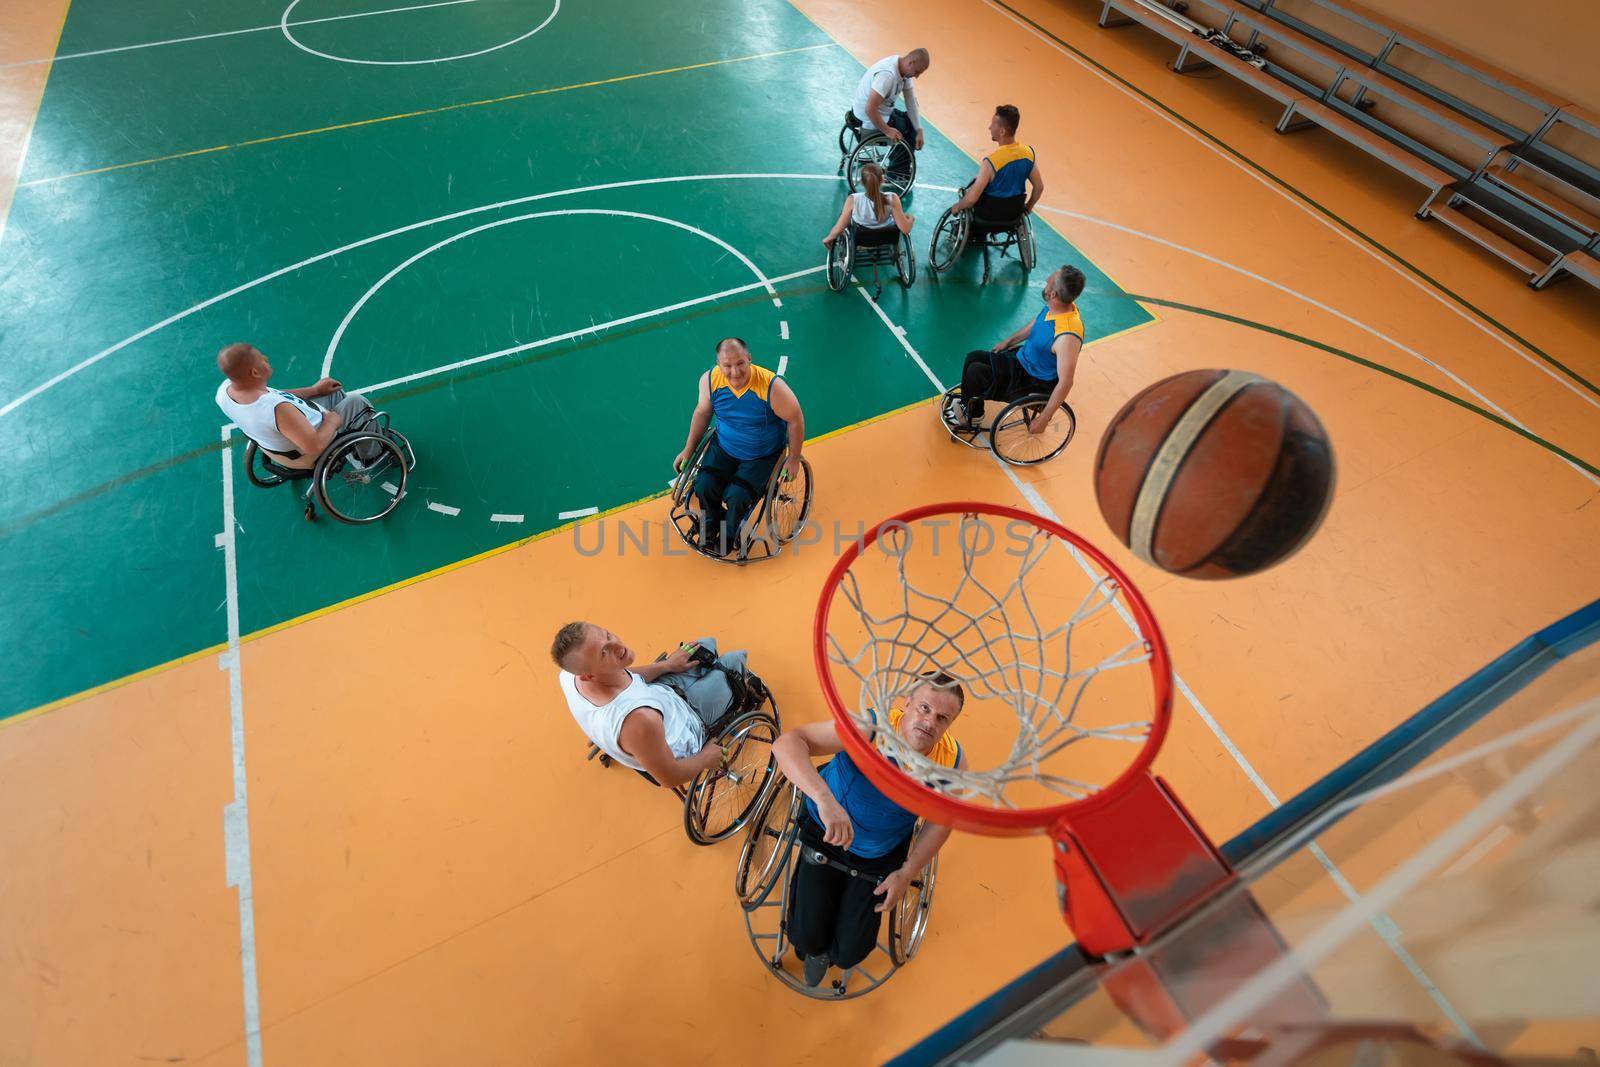 Disabled War or work veterans mixed race and age basketball teams in wheelchairs playing a training match in a sports gym hall. Handicapped people rehabilitation and inclusion concept.  by dotshock